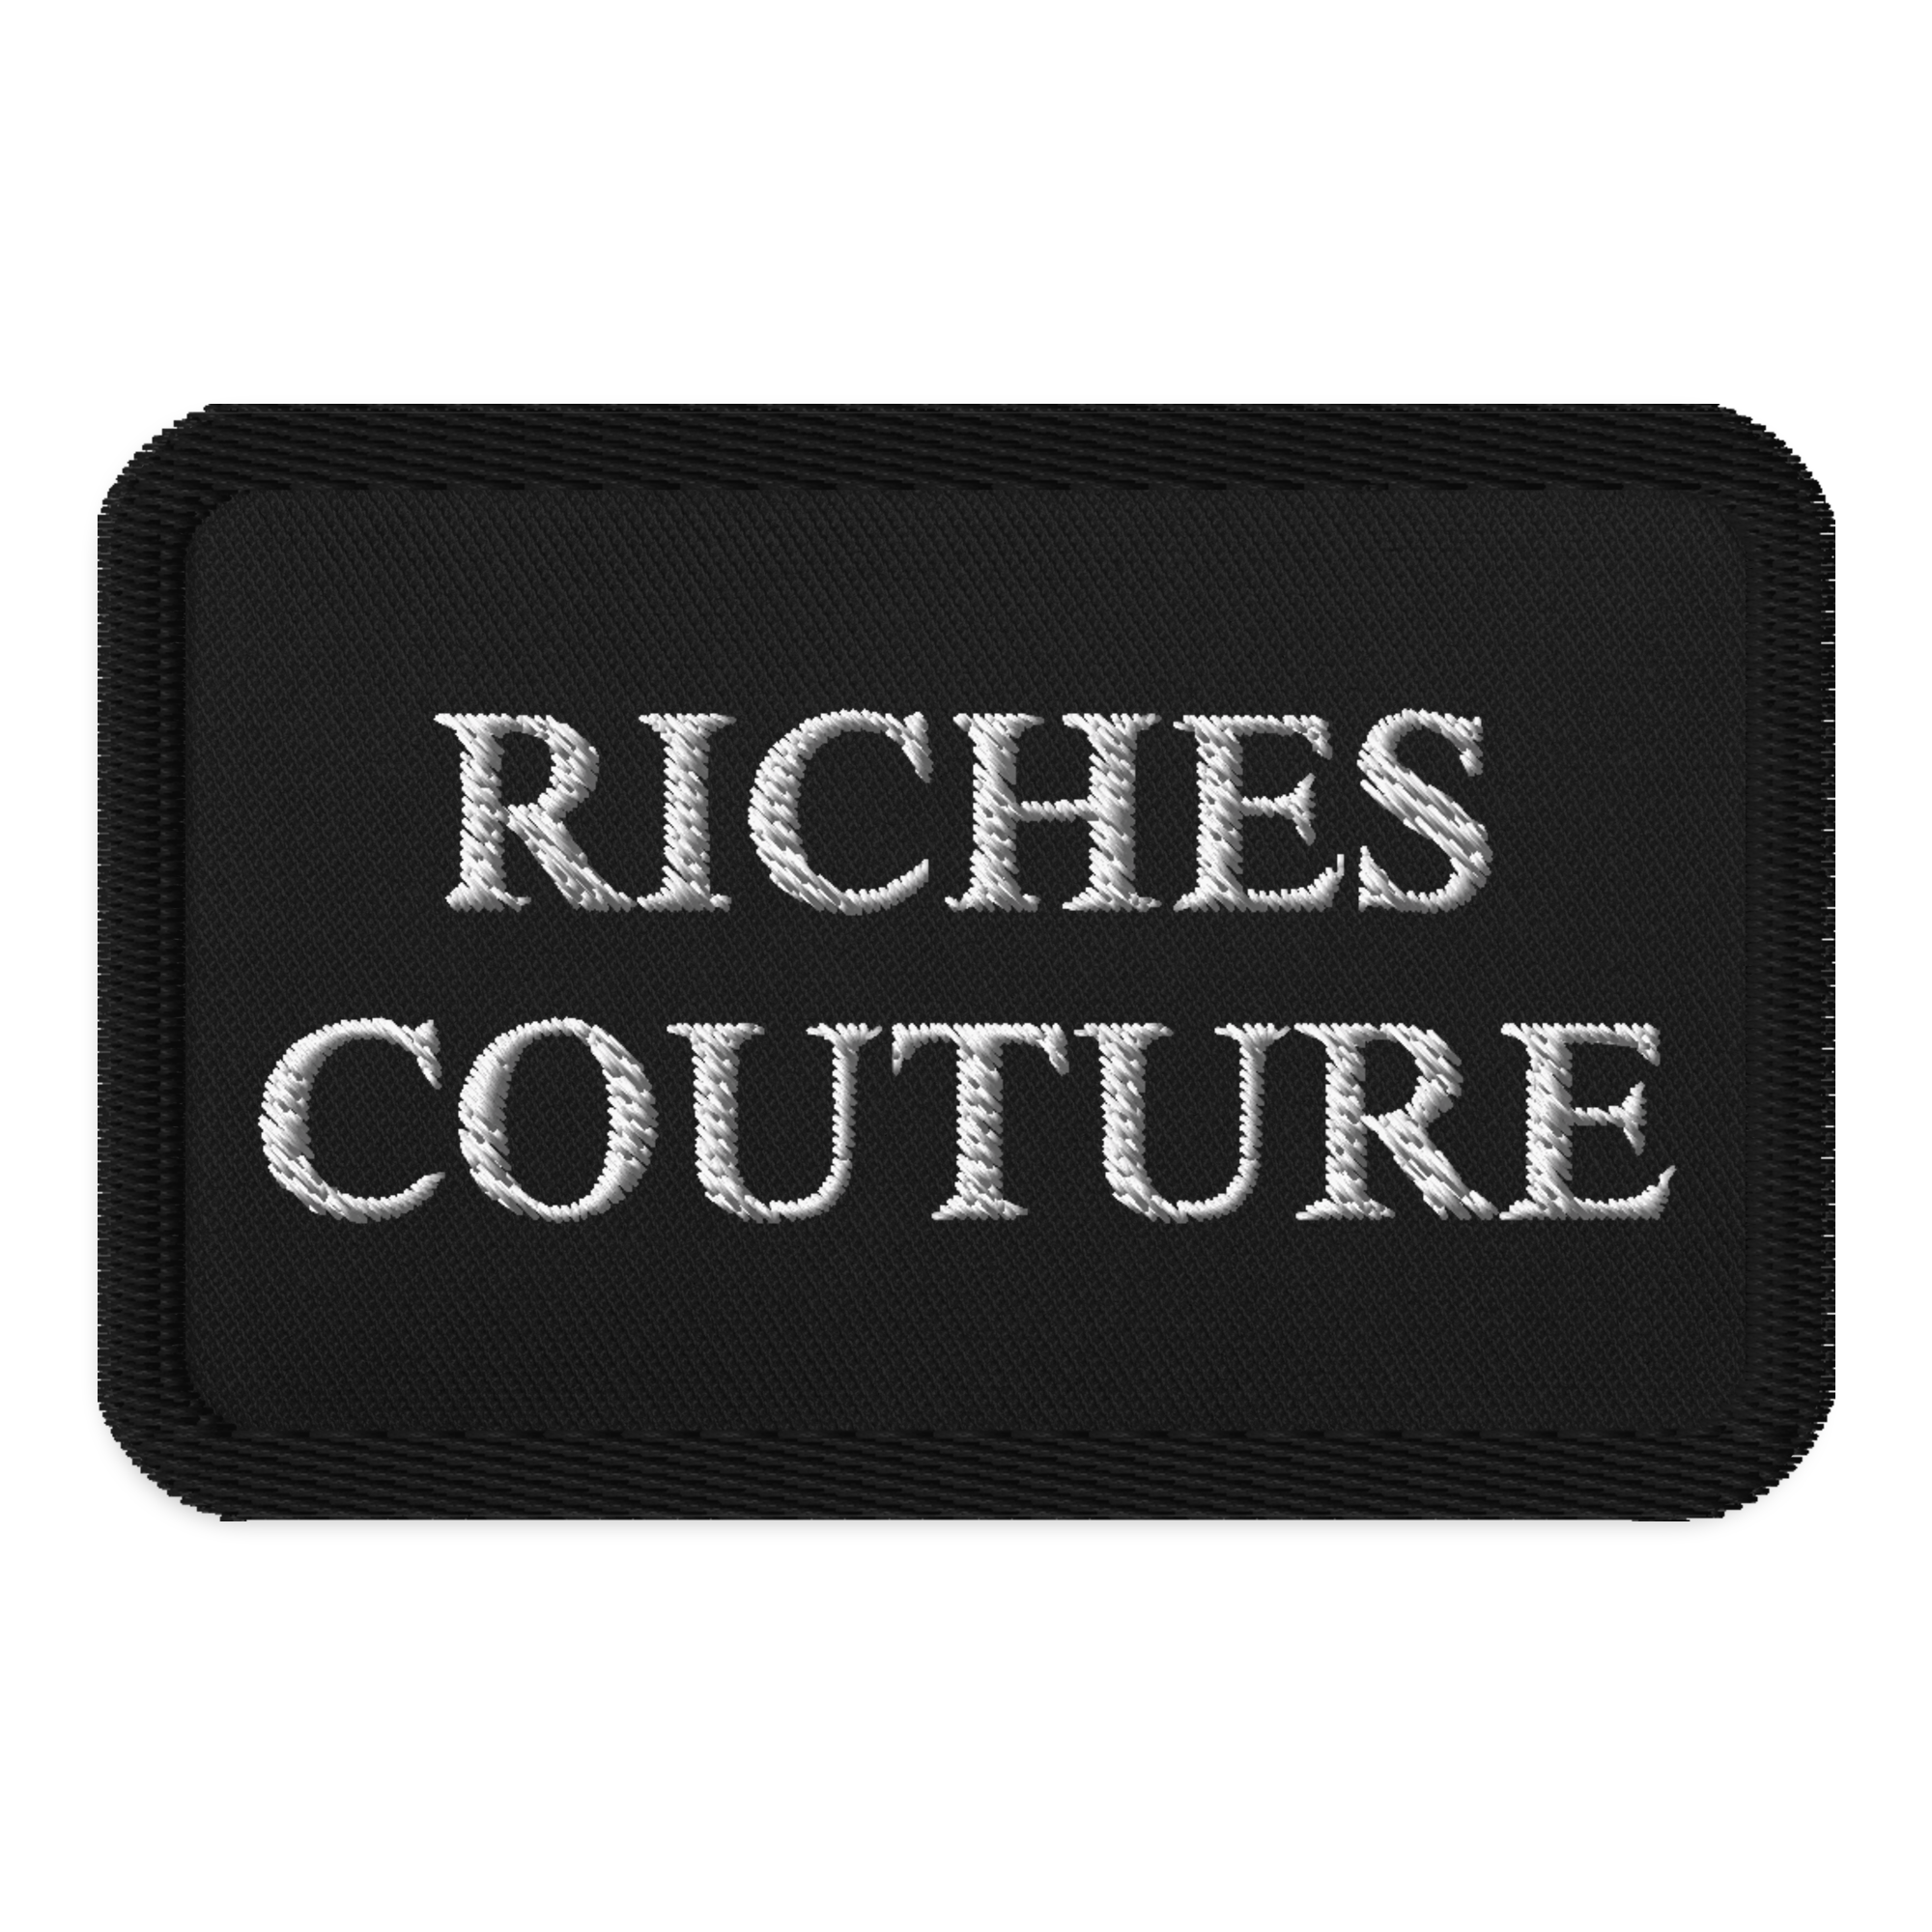 Riches Couture black embroidered patch